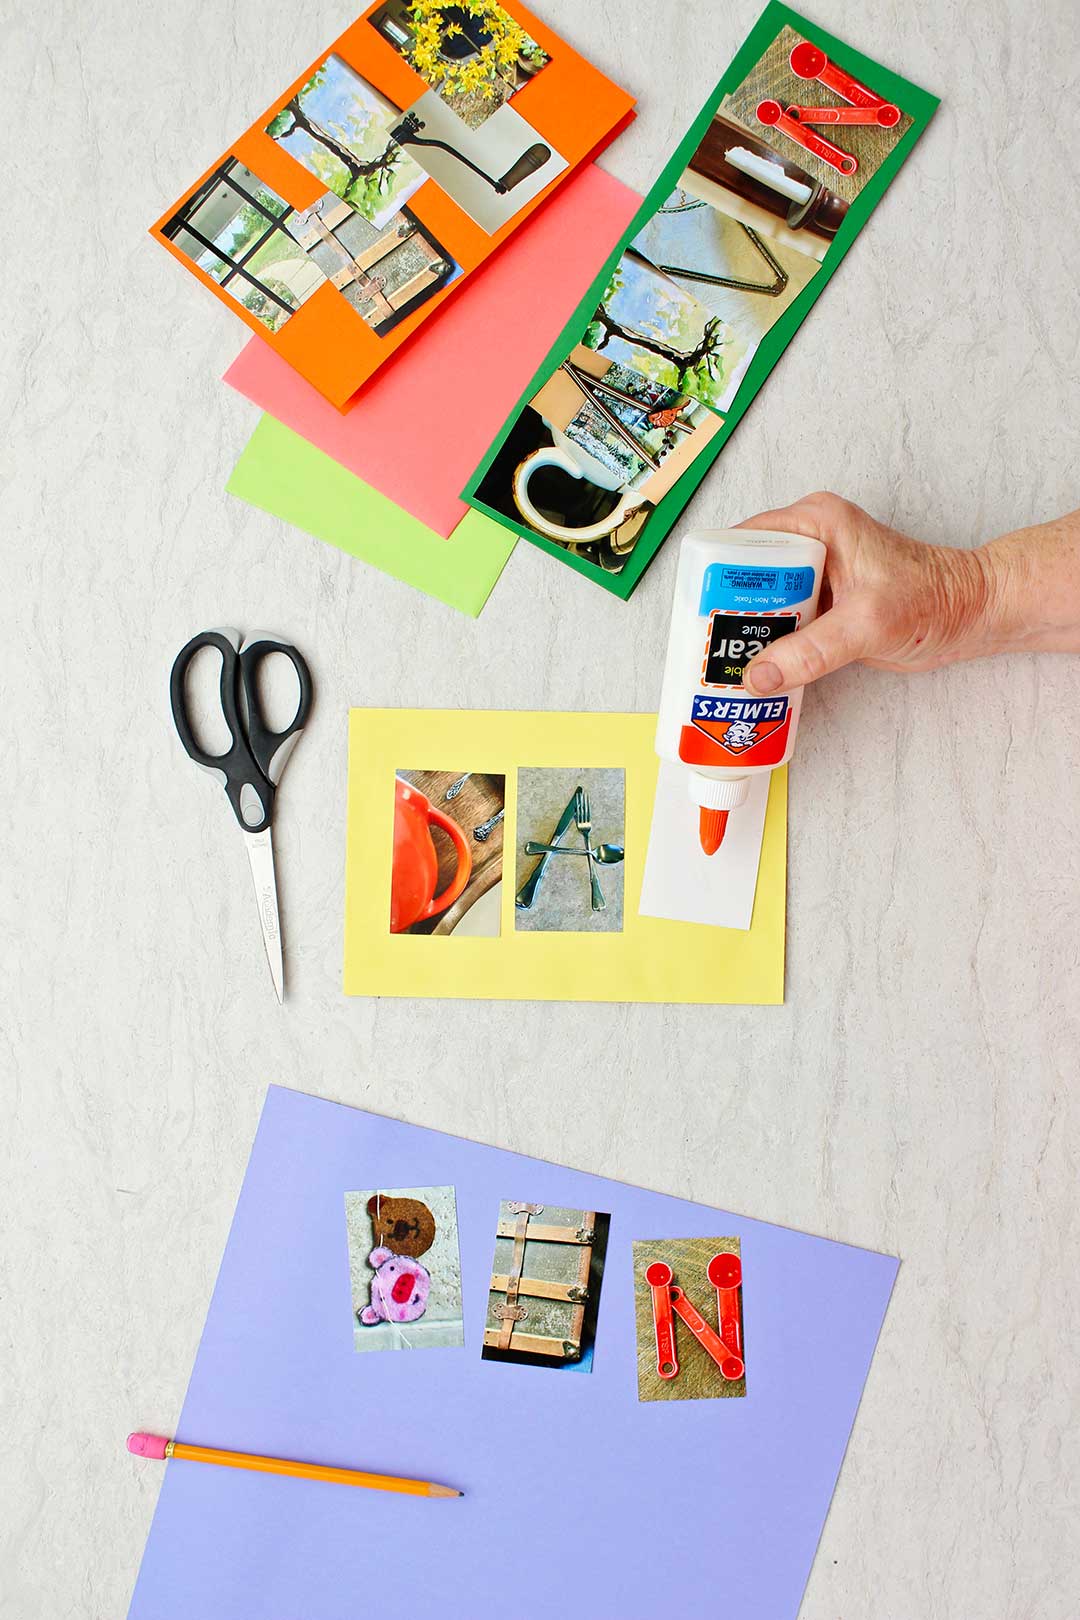 Hand holding white glue gluing a letter to a photo card on yellow paper.